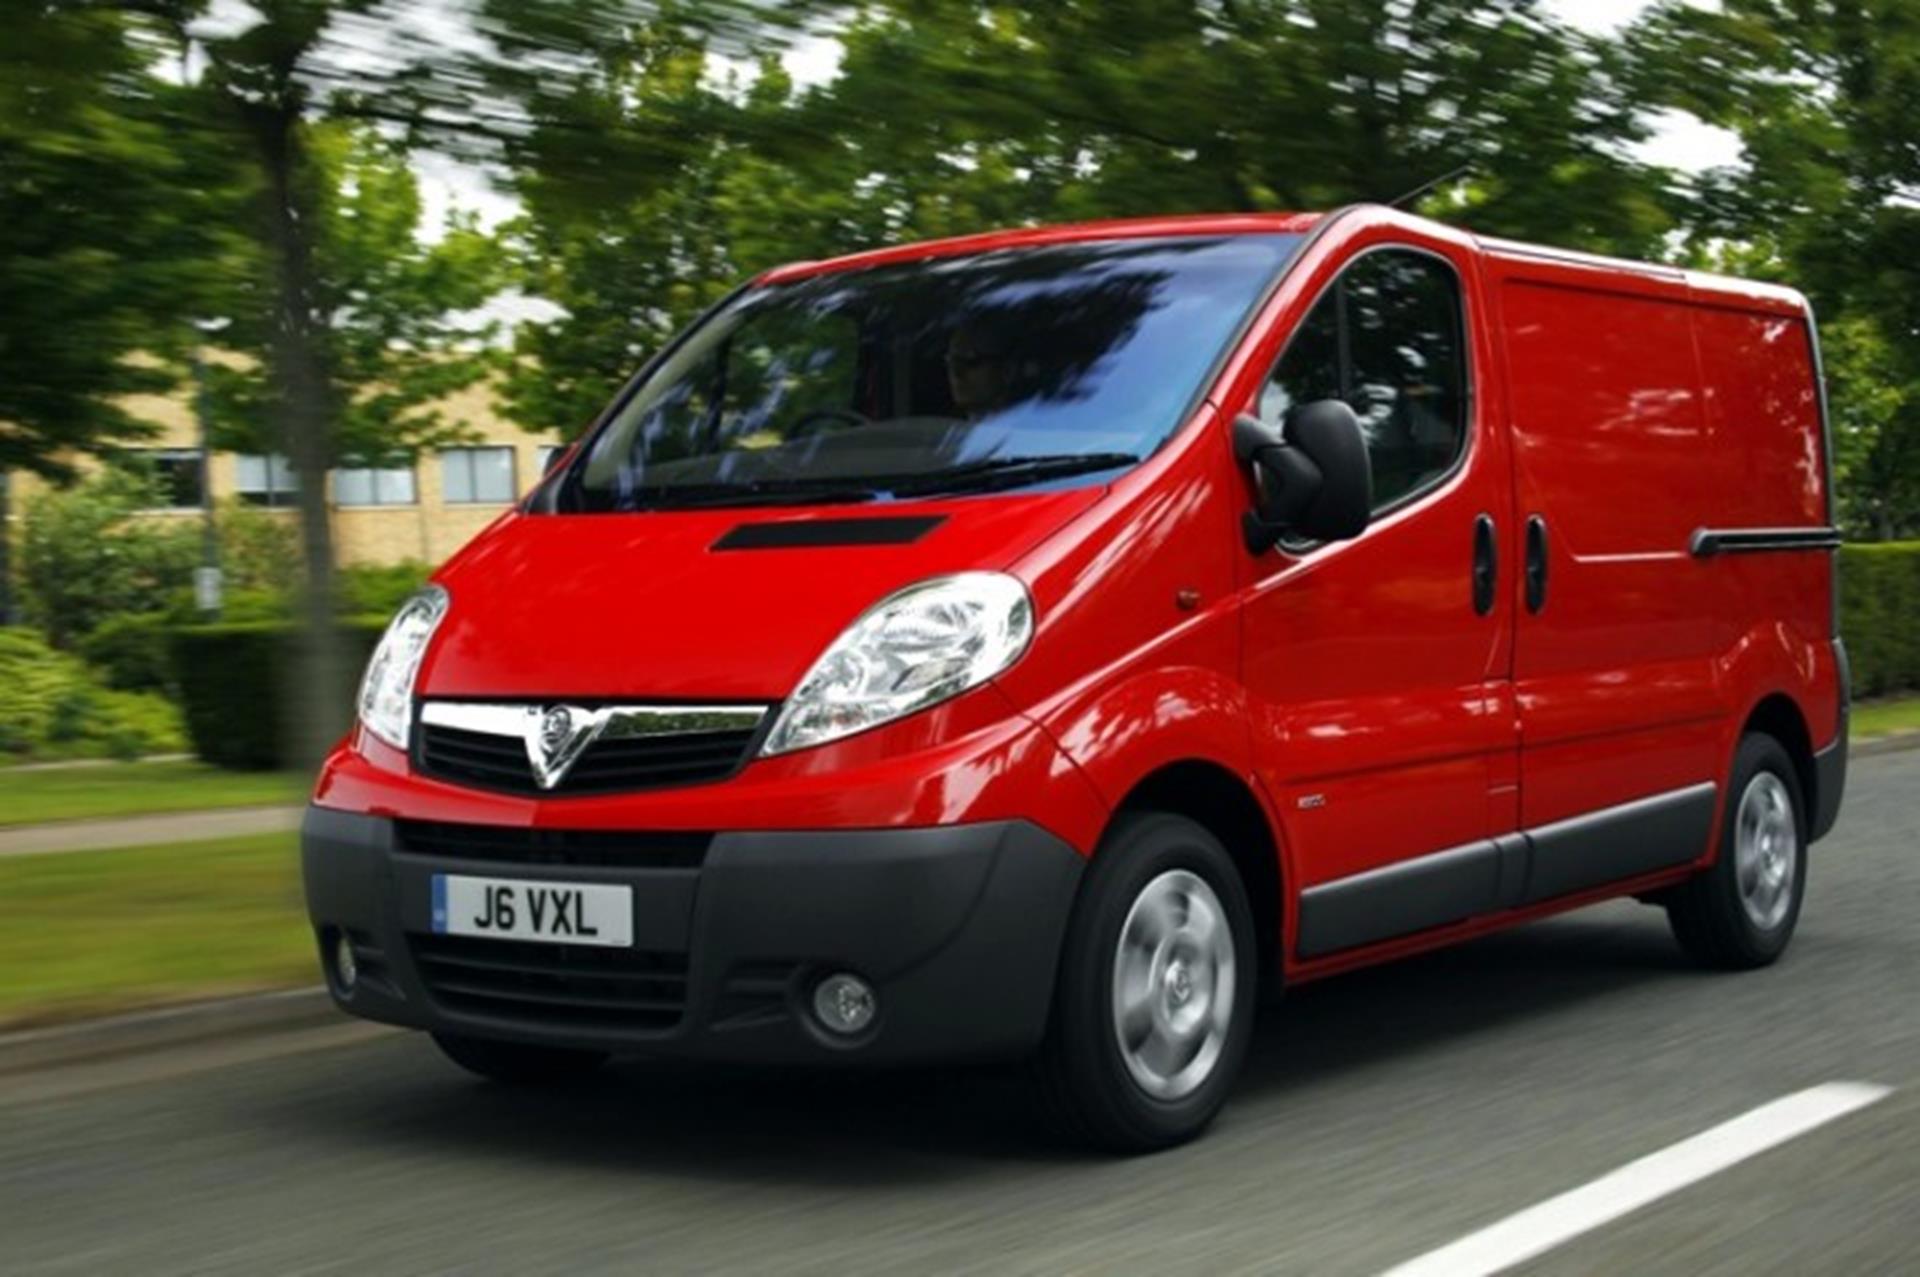 VAUXHALL VANS MARCH INTO POLE POSITION